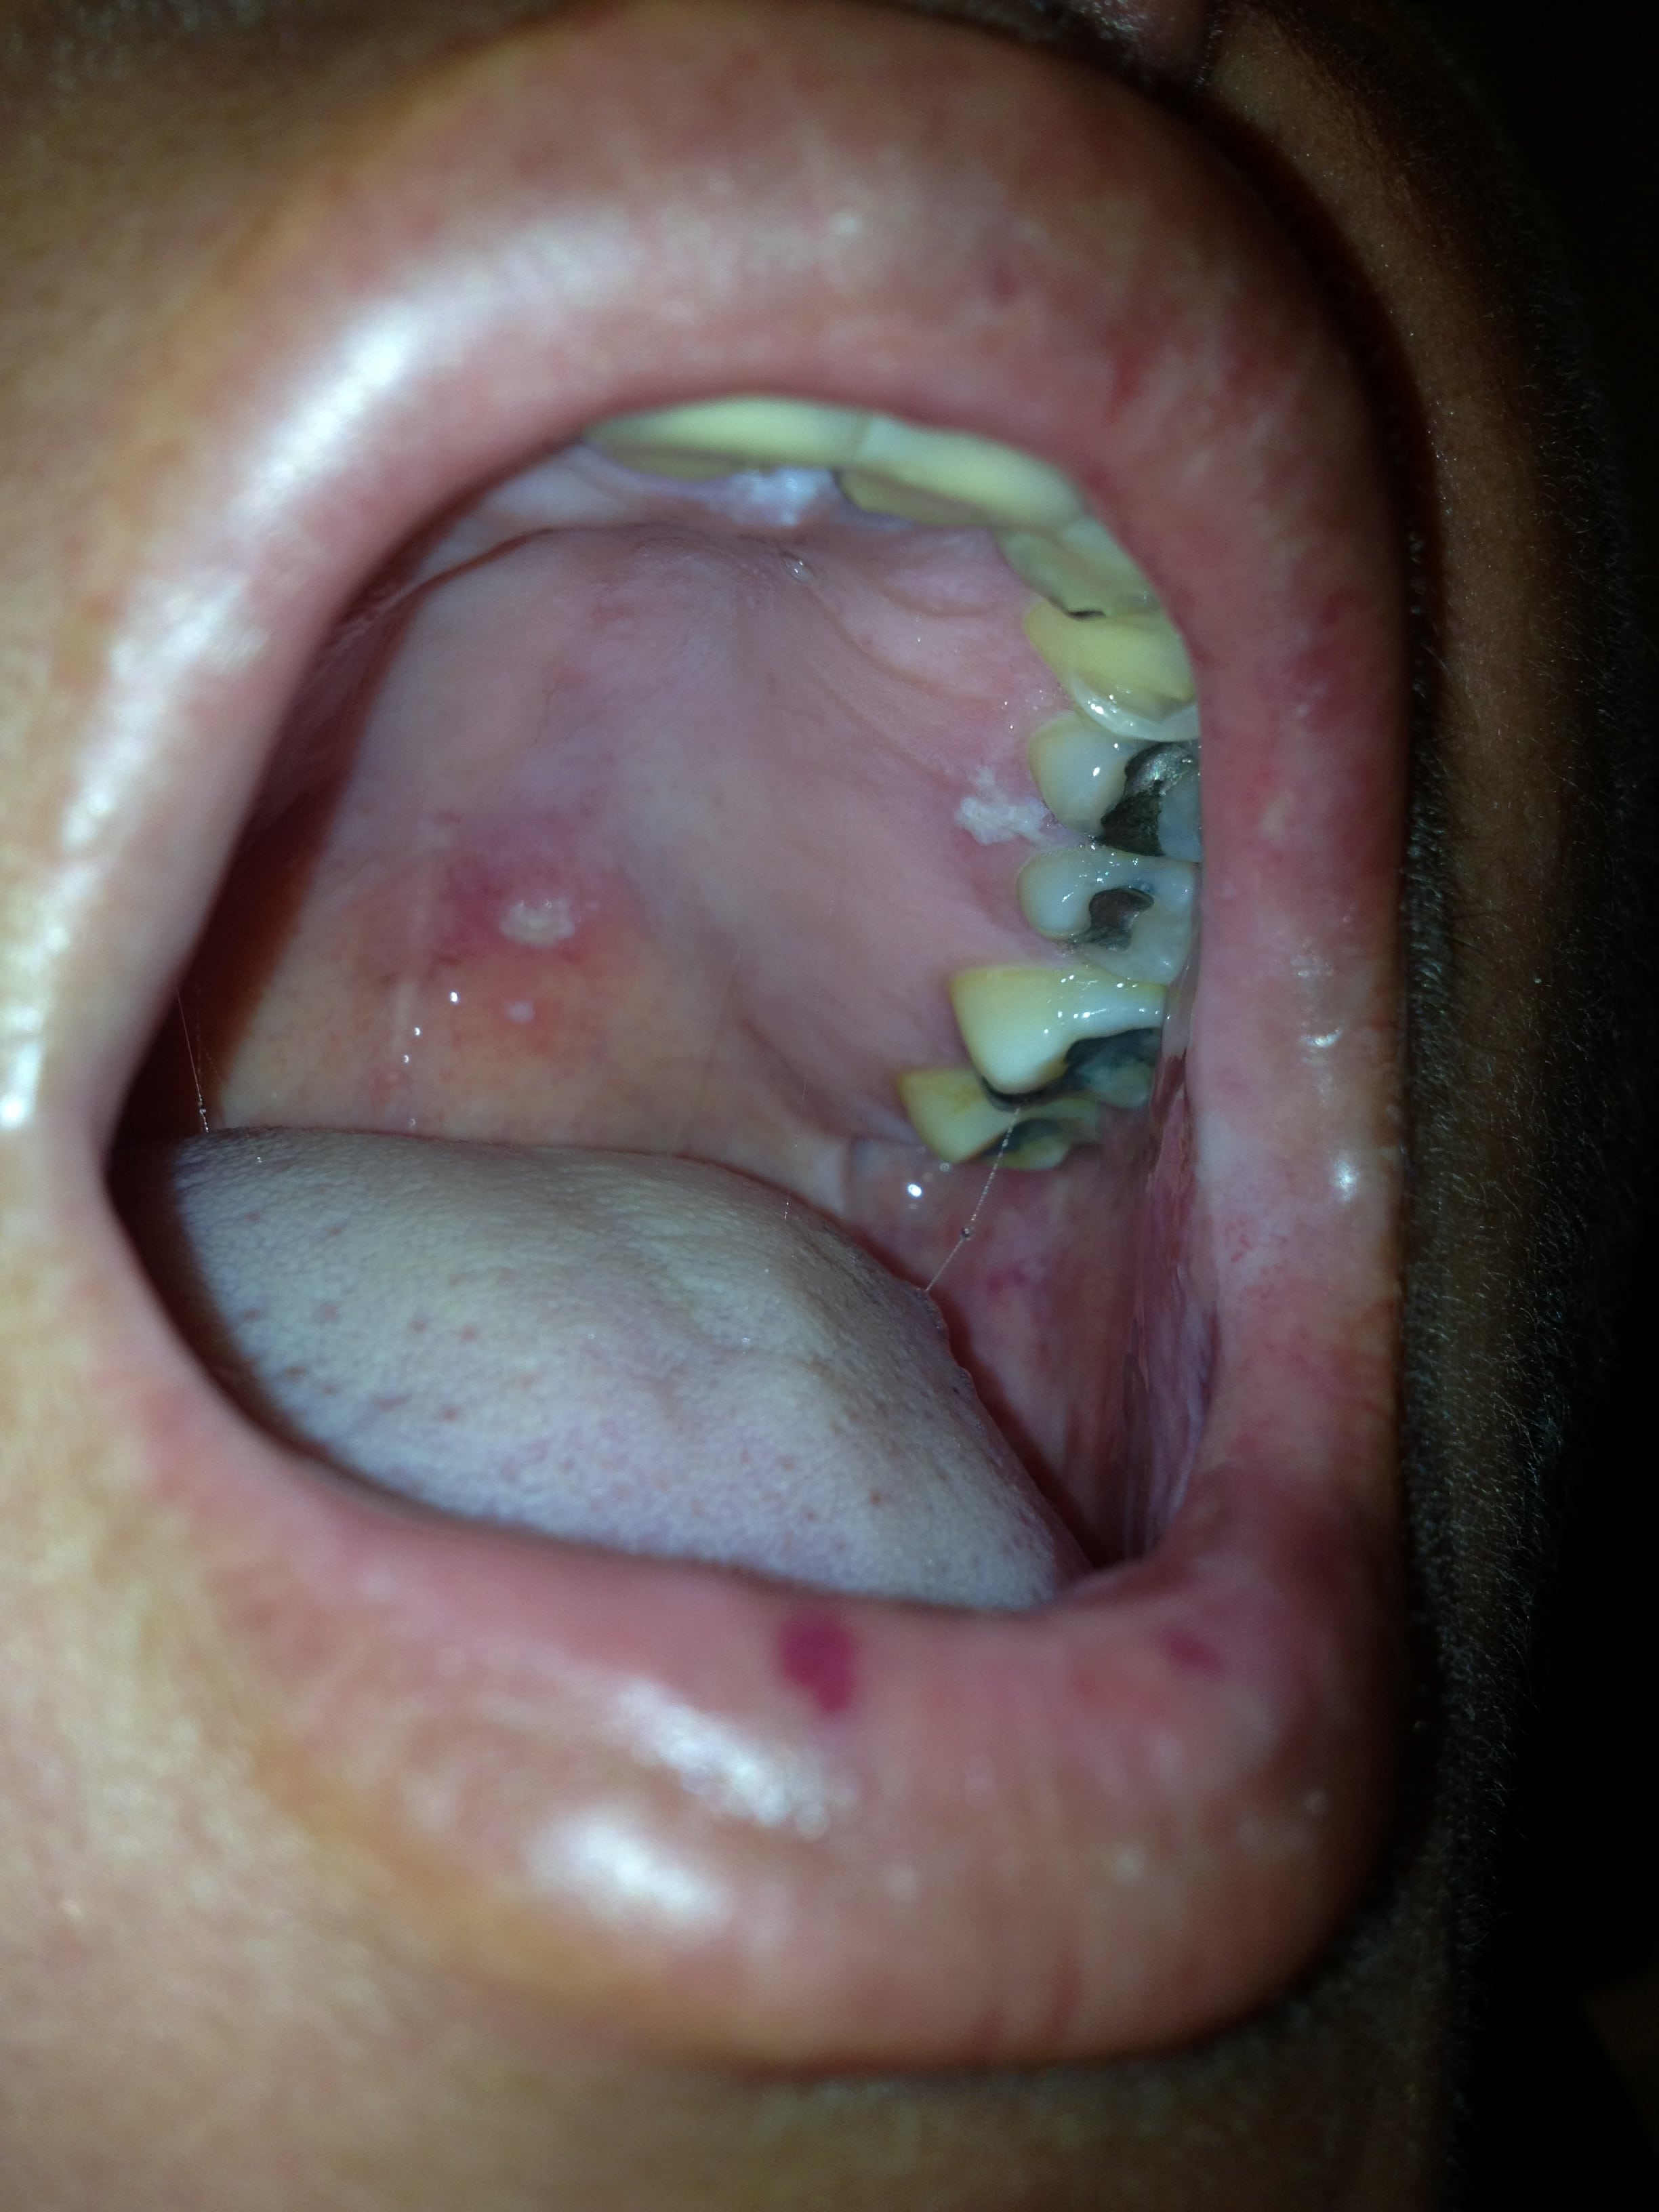 Herpes Zoster Ophthalmicus Extending To The Palate The Western Journal Of Emergency Medicine